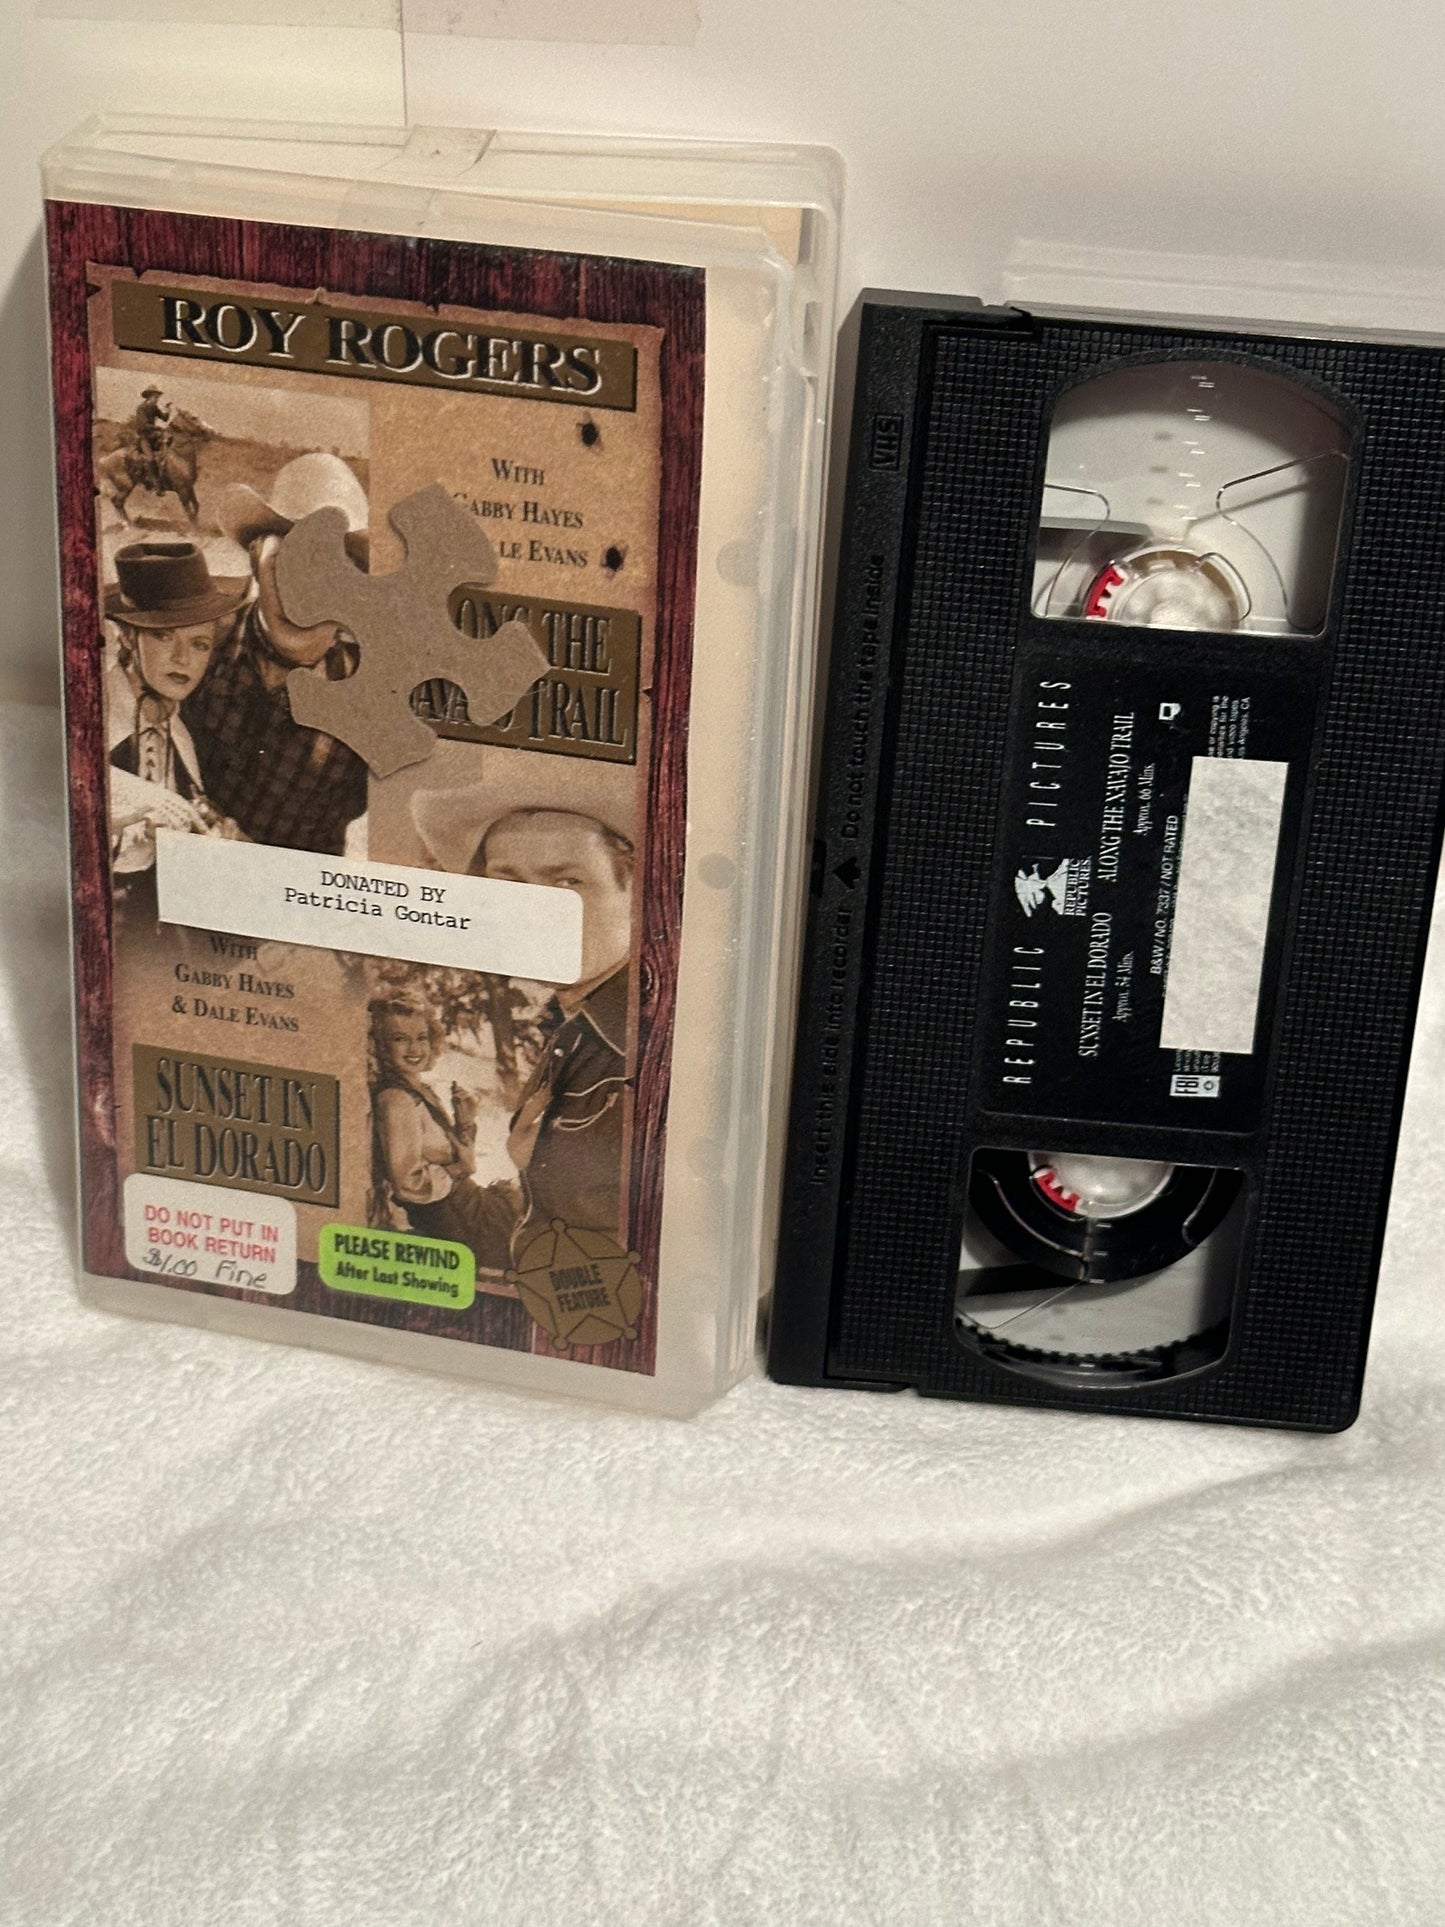 Experience the Breathtaking Roy Rogers Sunset in El Dorado on VHS